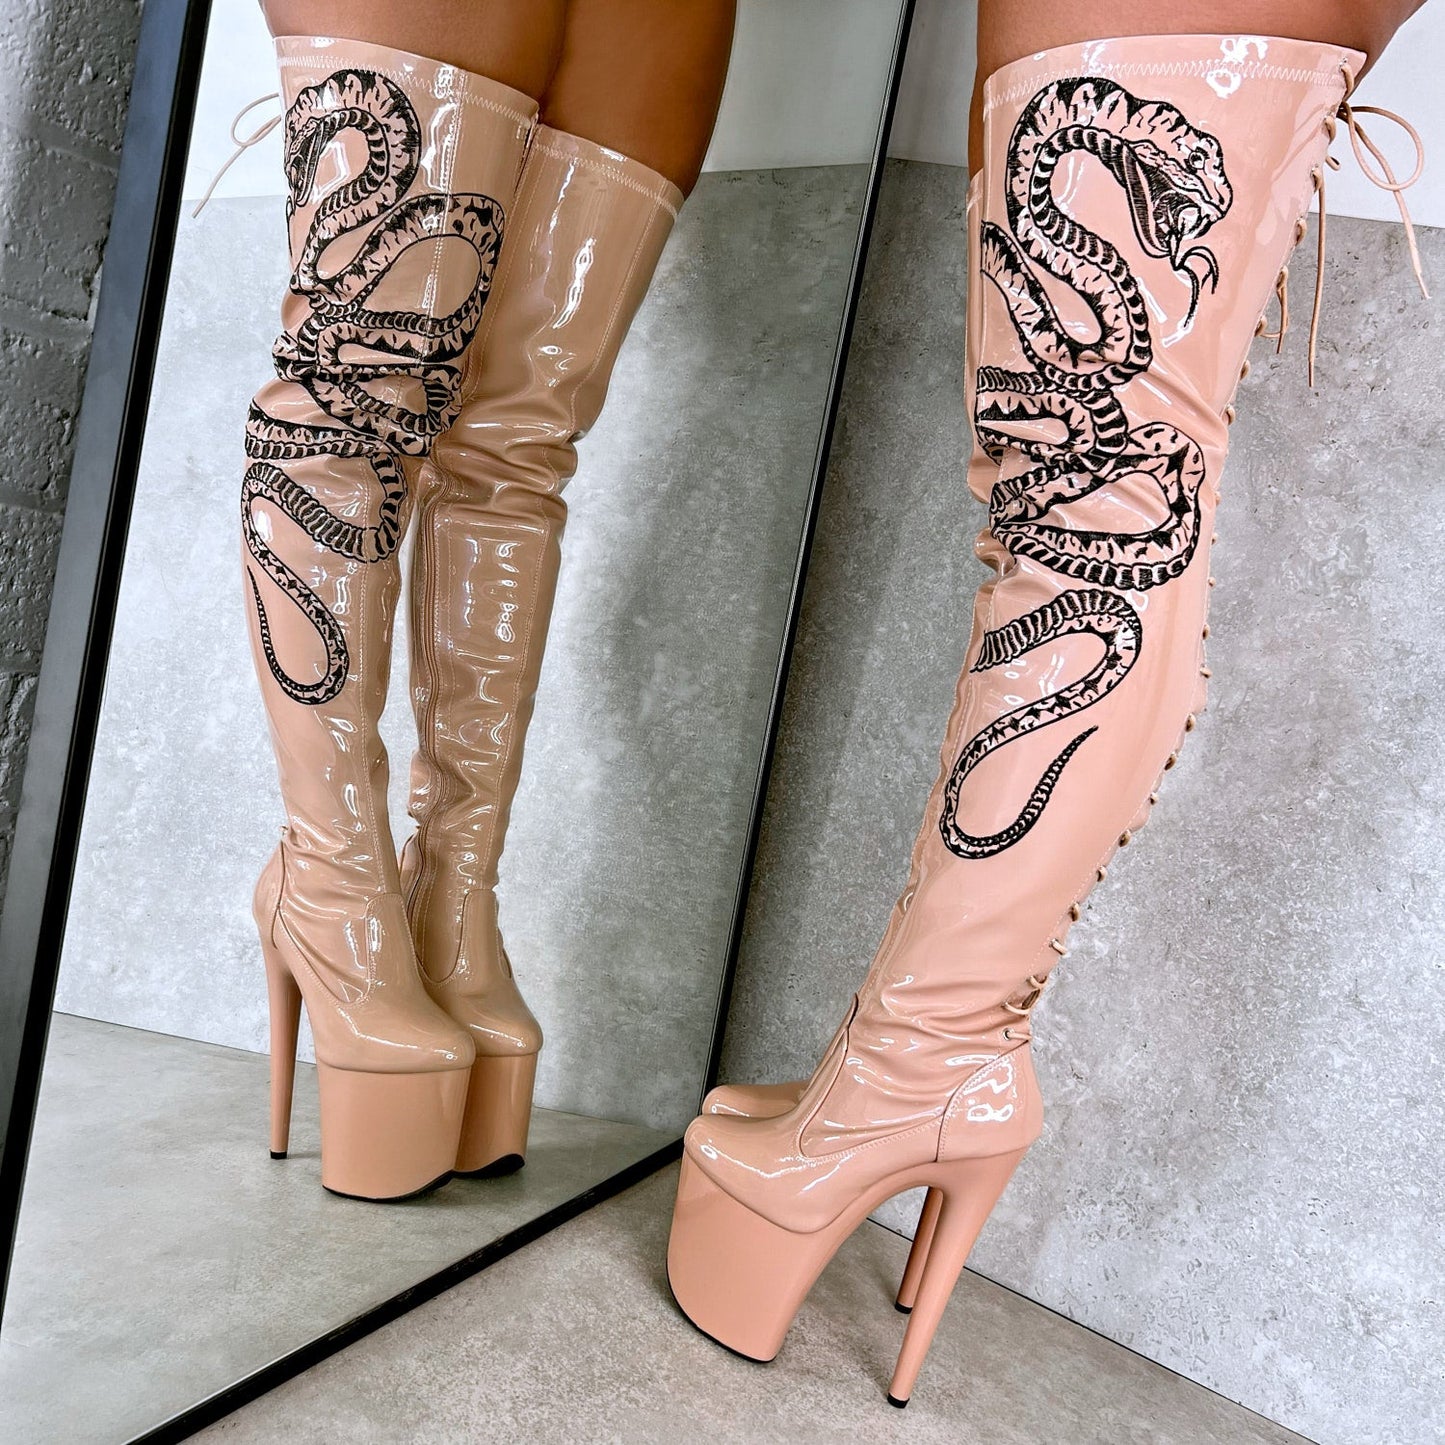 VIPER Boot Tan with Black Thicc Thigh High - 8INCH